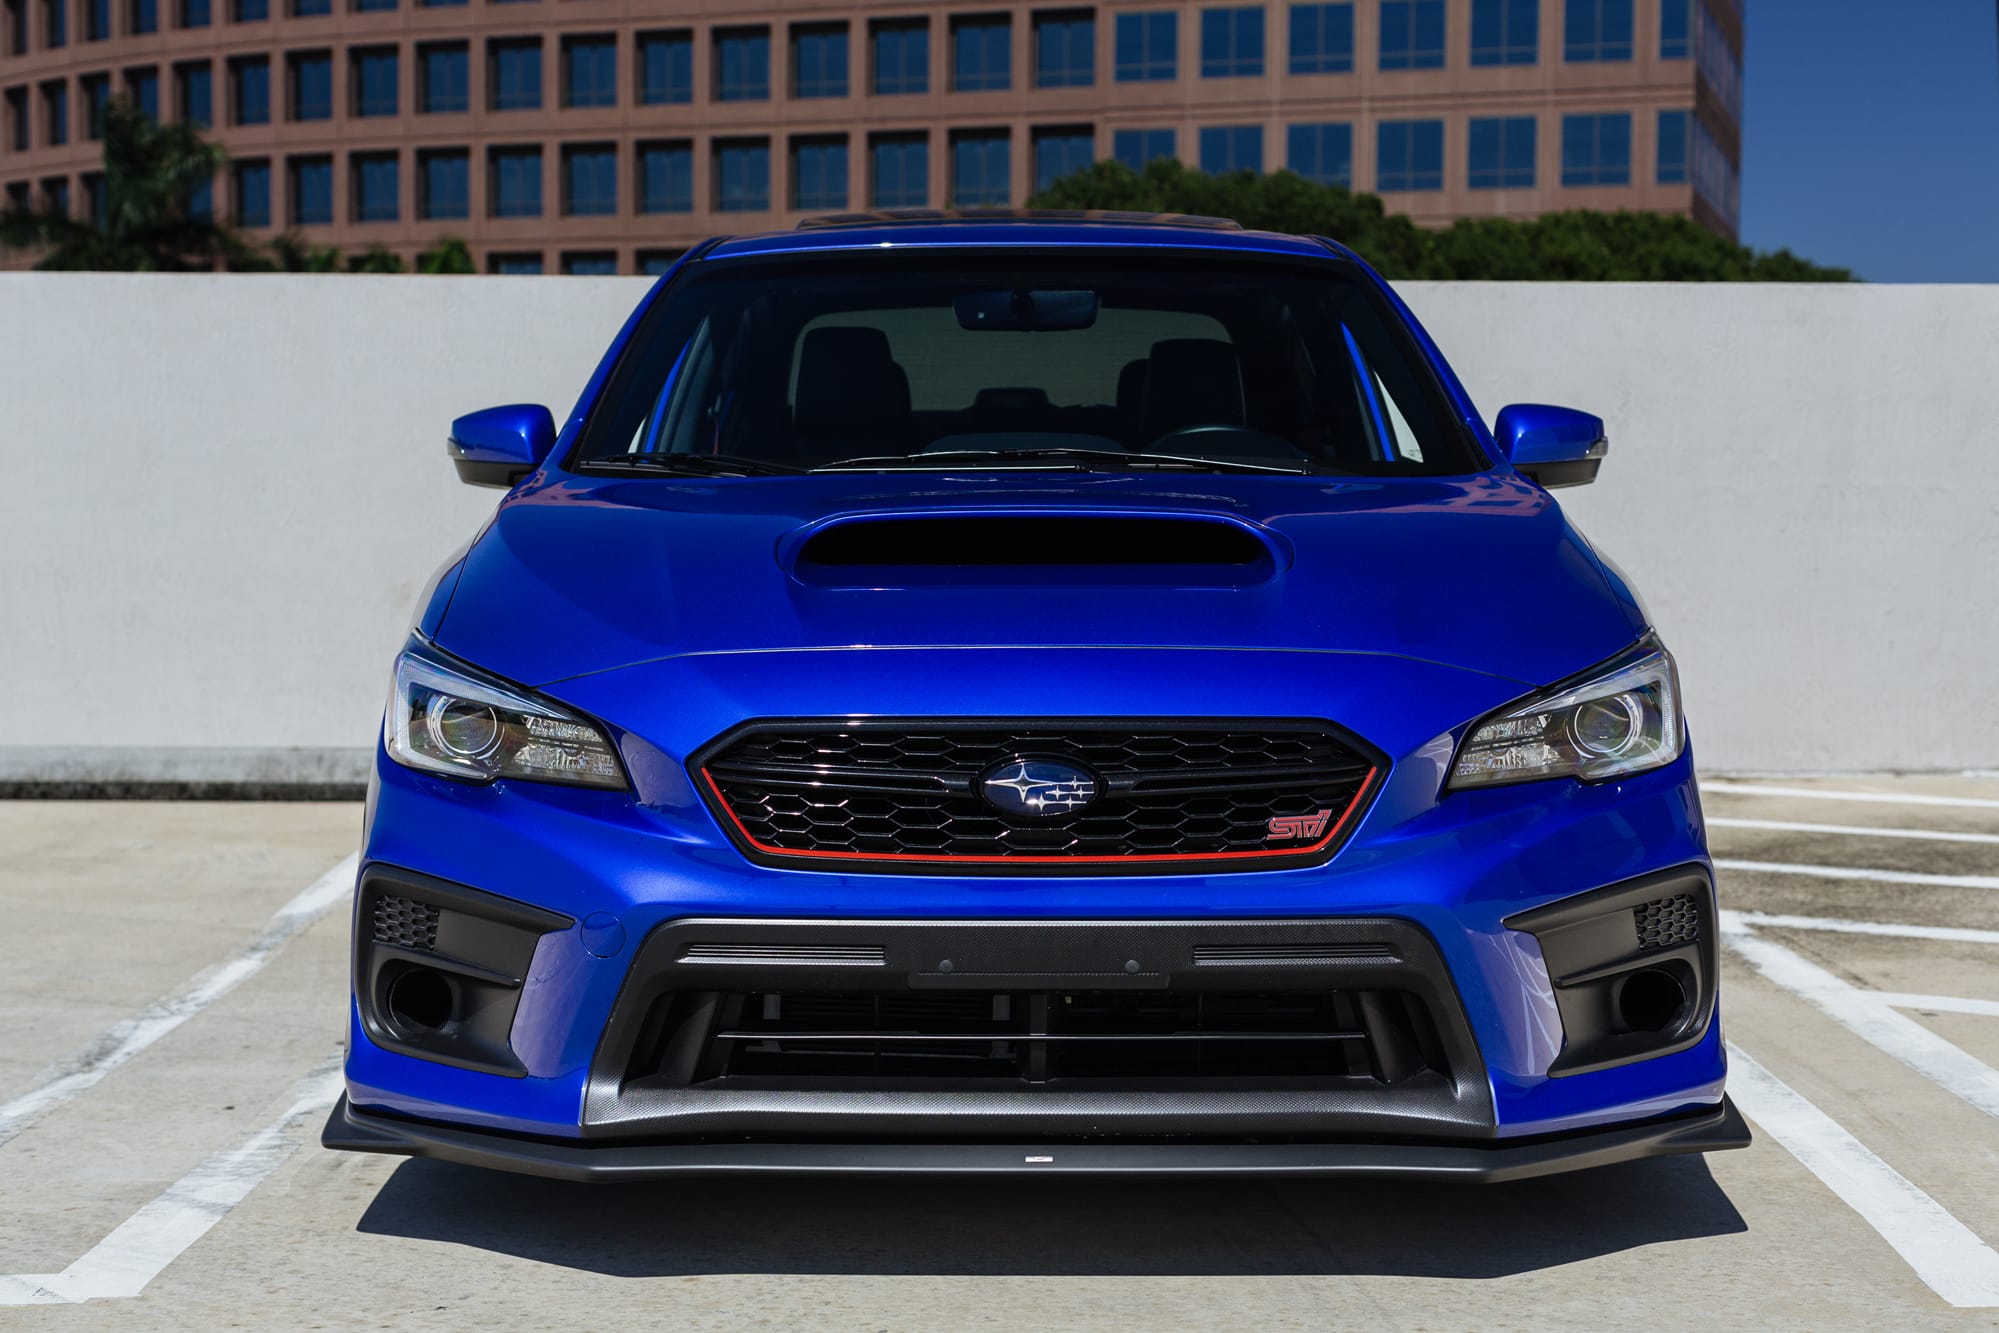 2020 Subaru WRX STi Limited (VA) | $30K in Upgrades! | Cobb | Tomei | Beat Rush | Obsessively Maintained | All Modifications in the Last 6 Months | Super Low Mileage!